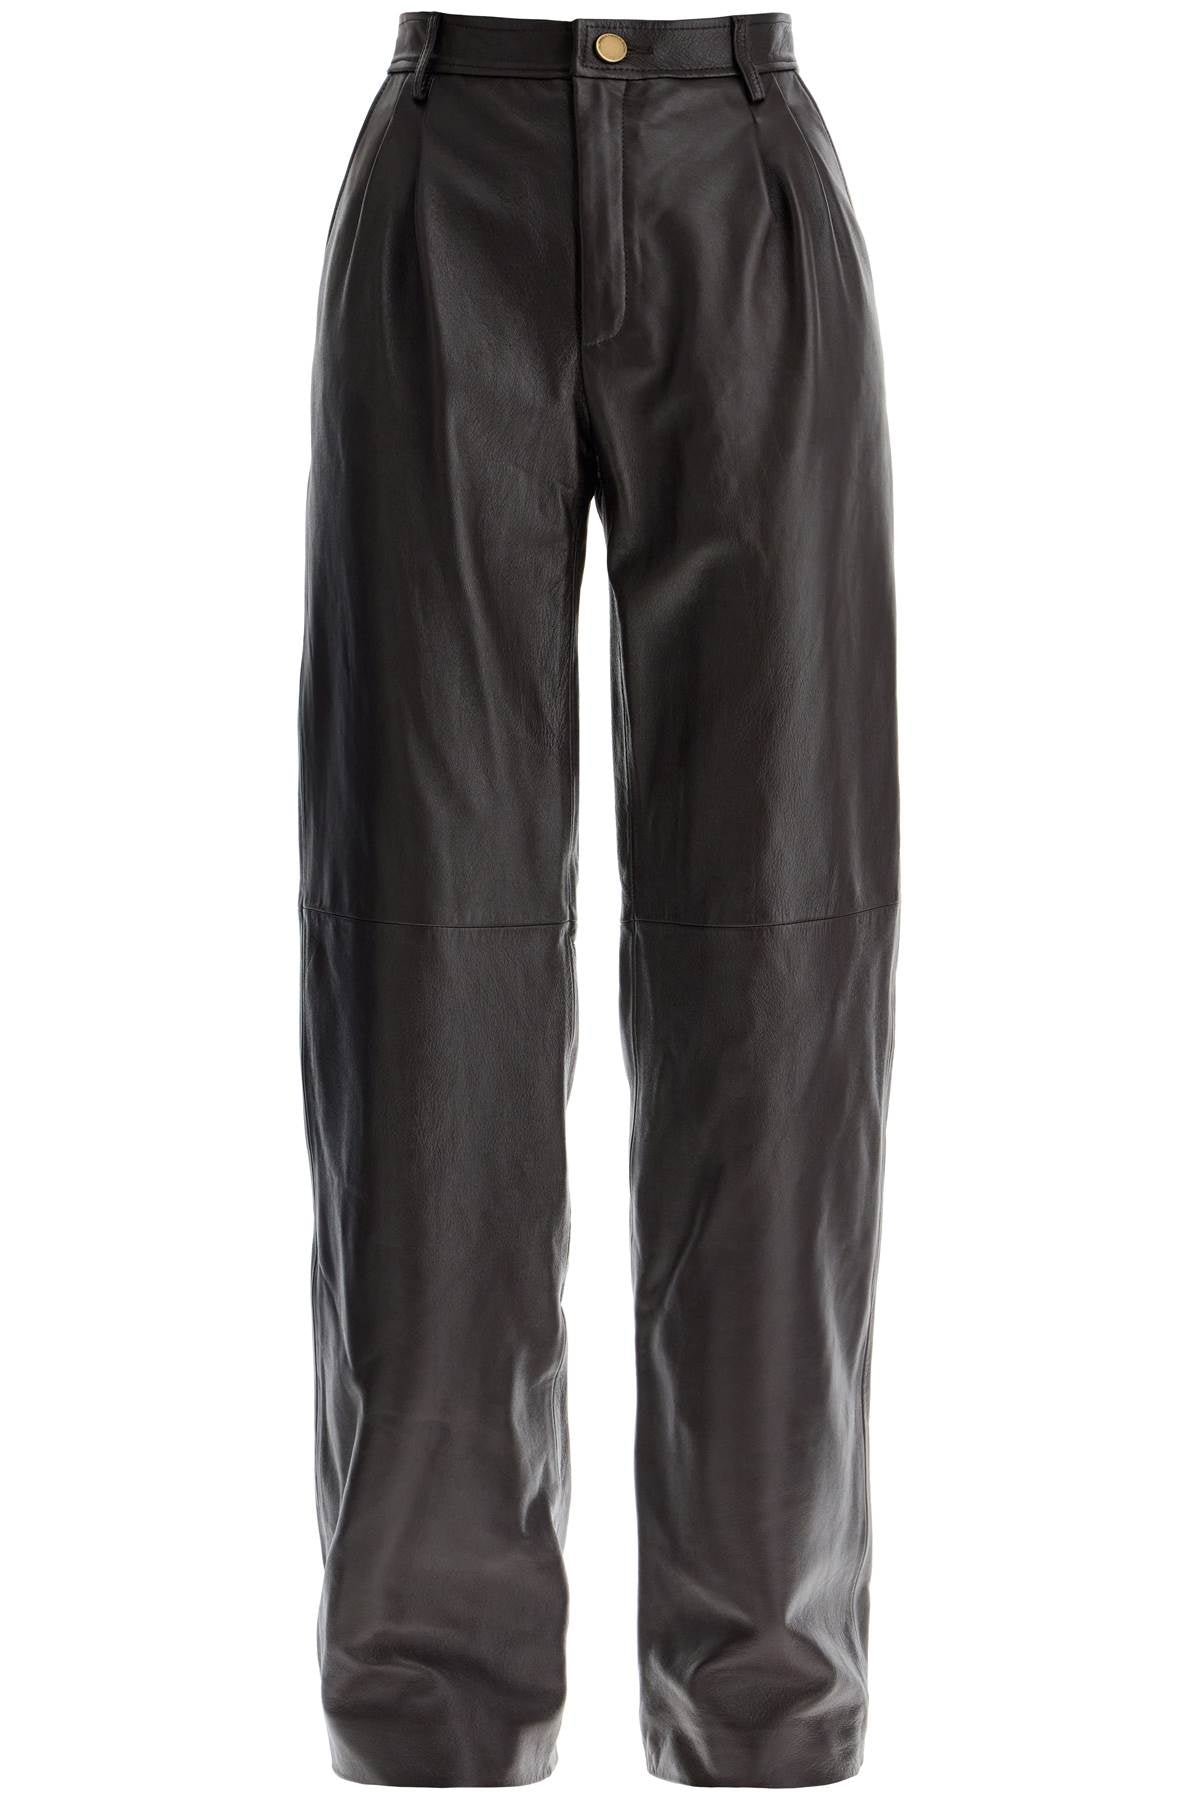 Alessandra Rich Leather Carrot Shaped Pants   Brown